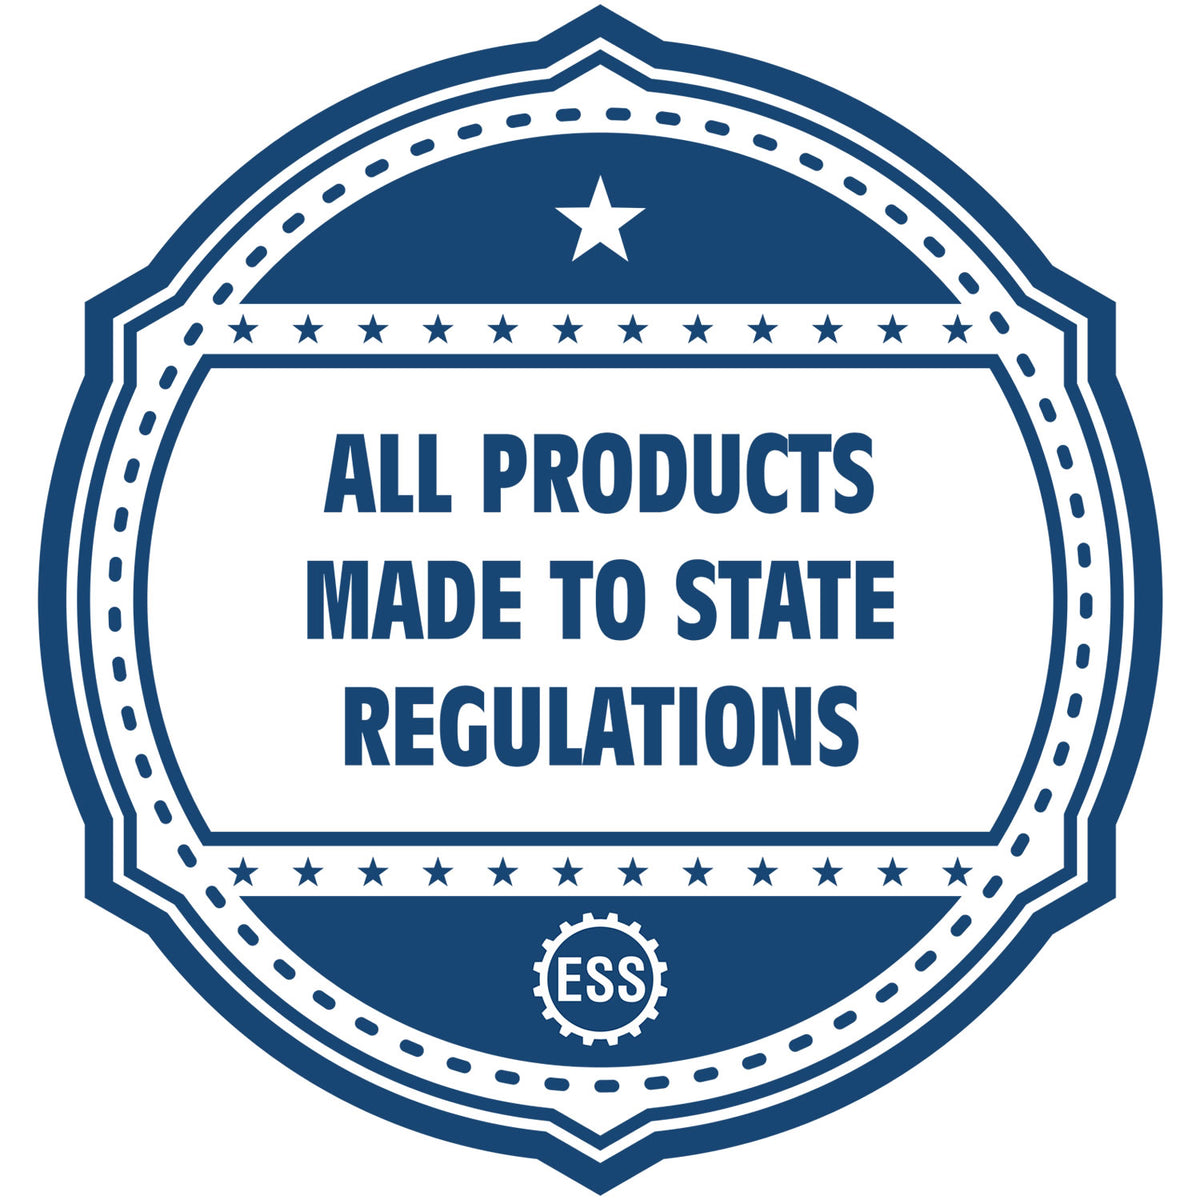 An icon or badge element for the Slim Pre-Inked State Seal Notary Stamp for Iowa showing that this product is made in compliance with state regulations.